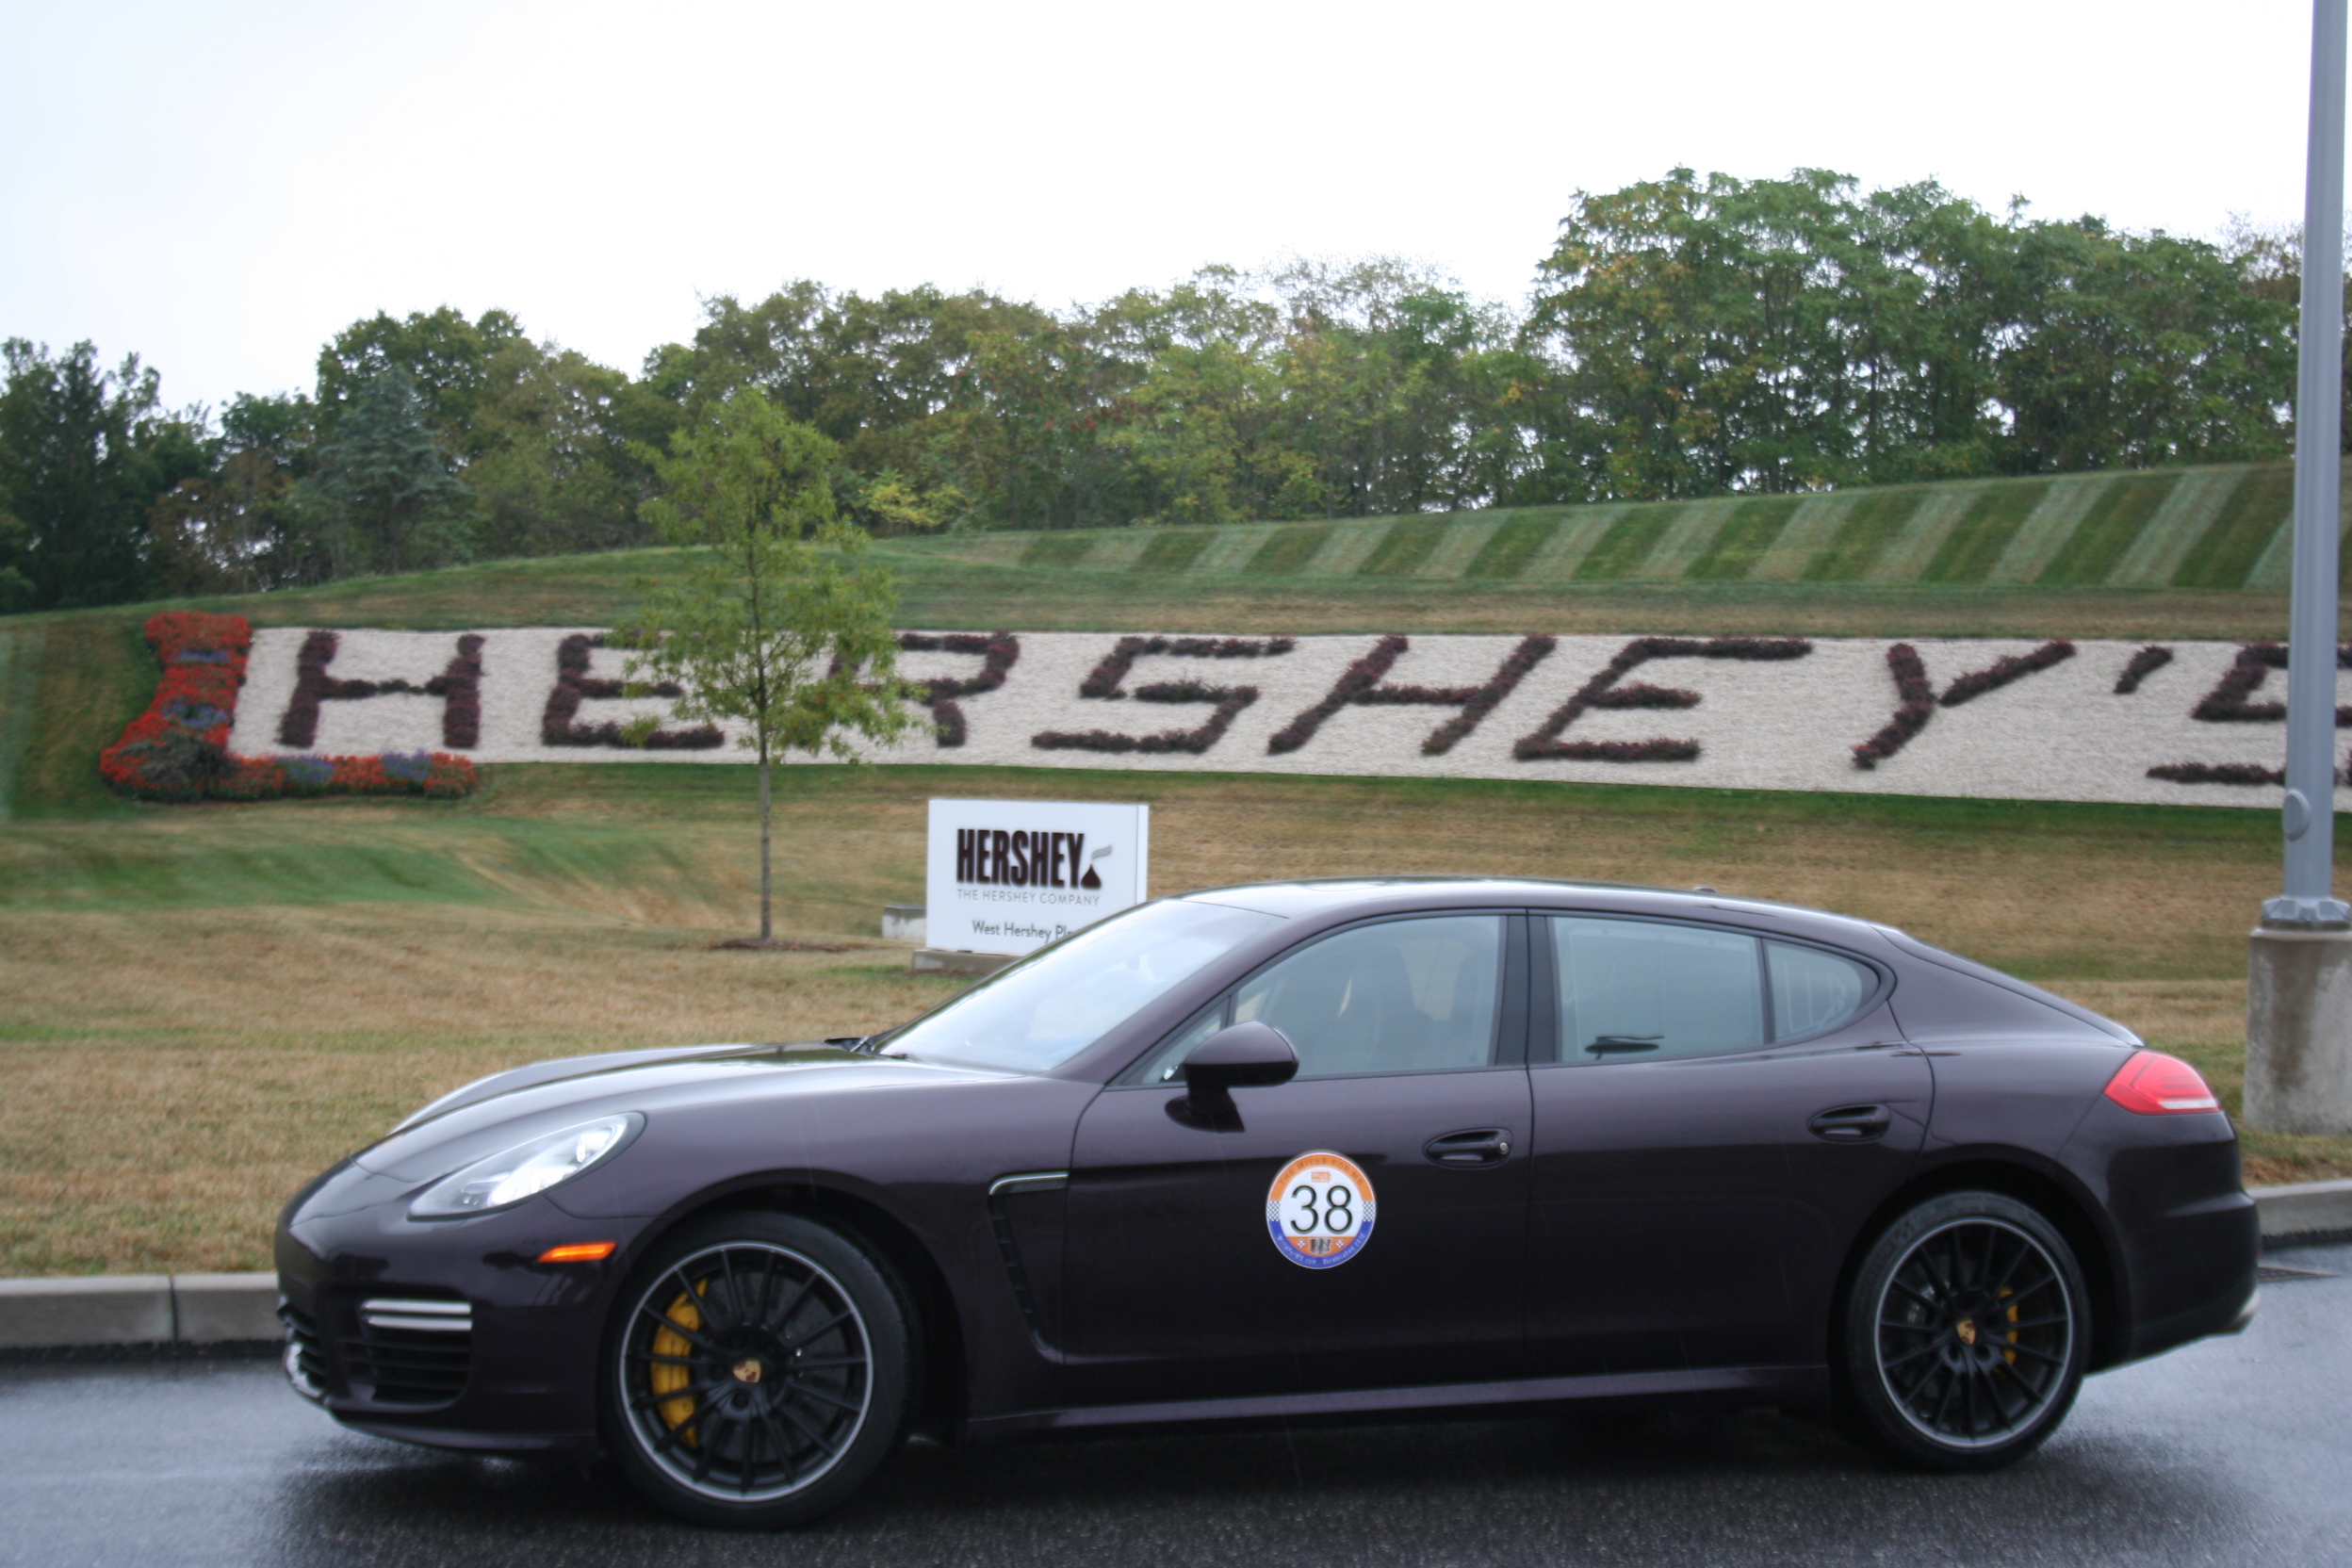 Car Report: The Porsche Panamera Turbo could double as a race car